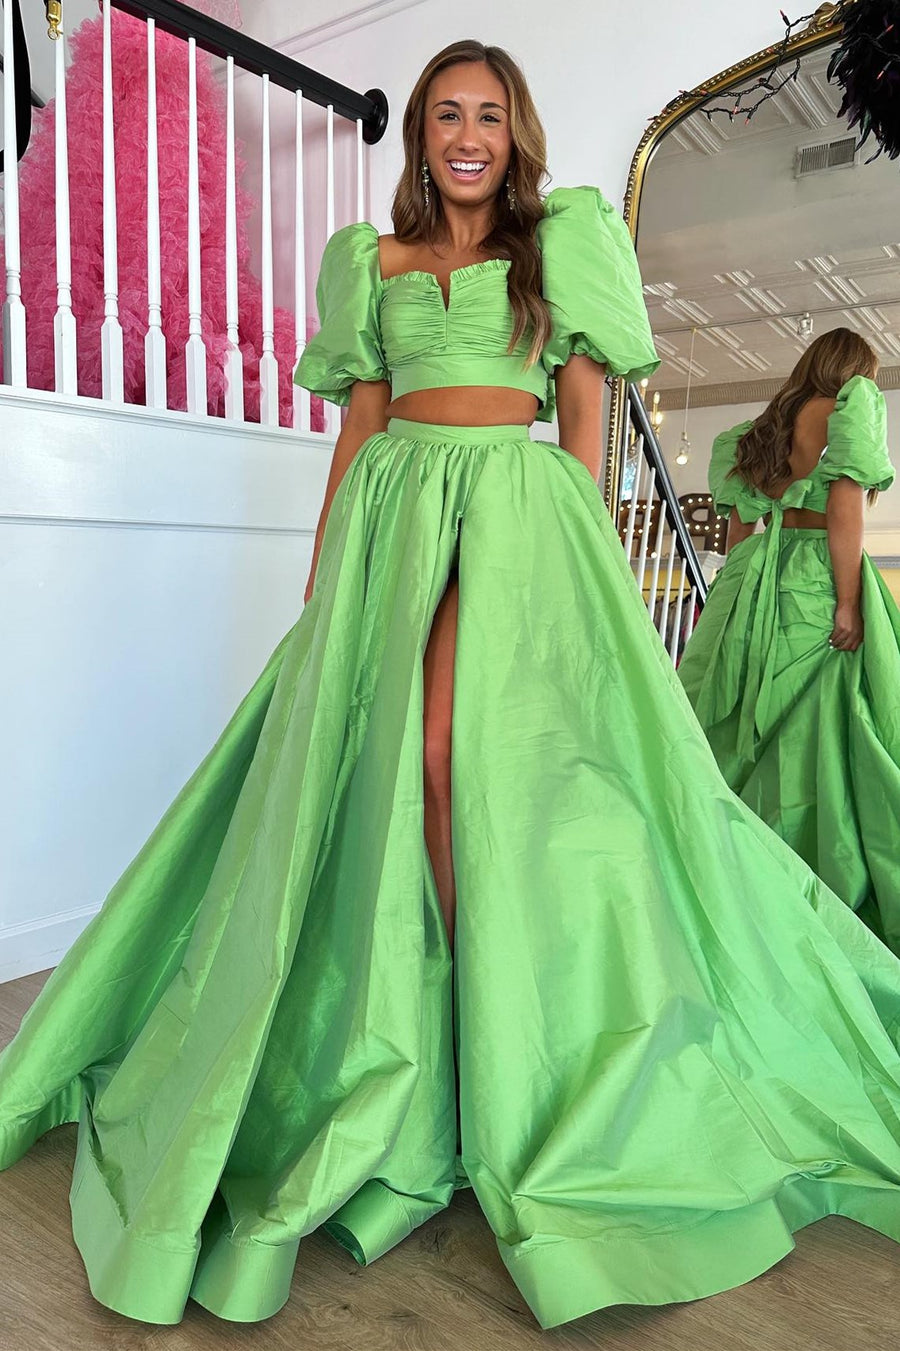 Two-Piece Green Puff Sleeve Tie-Back Long Prom Dress